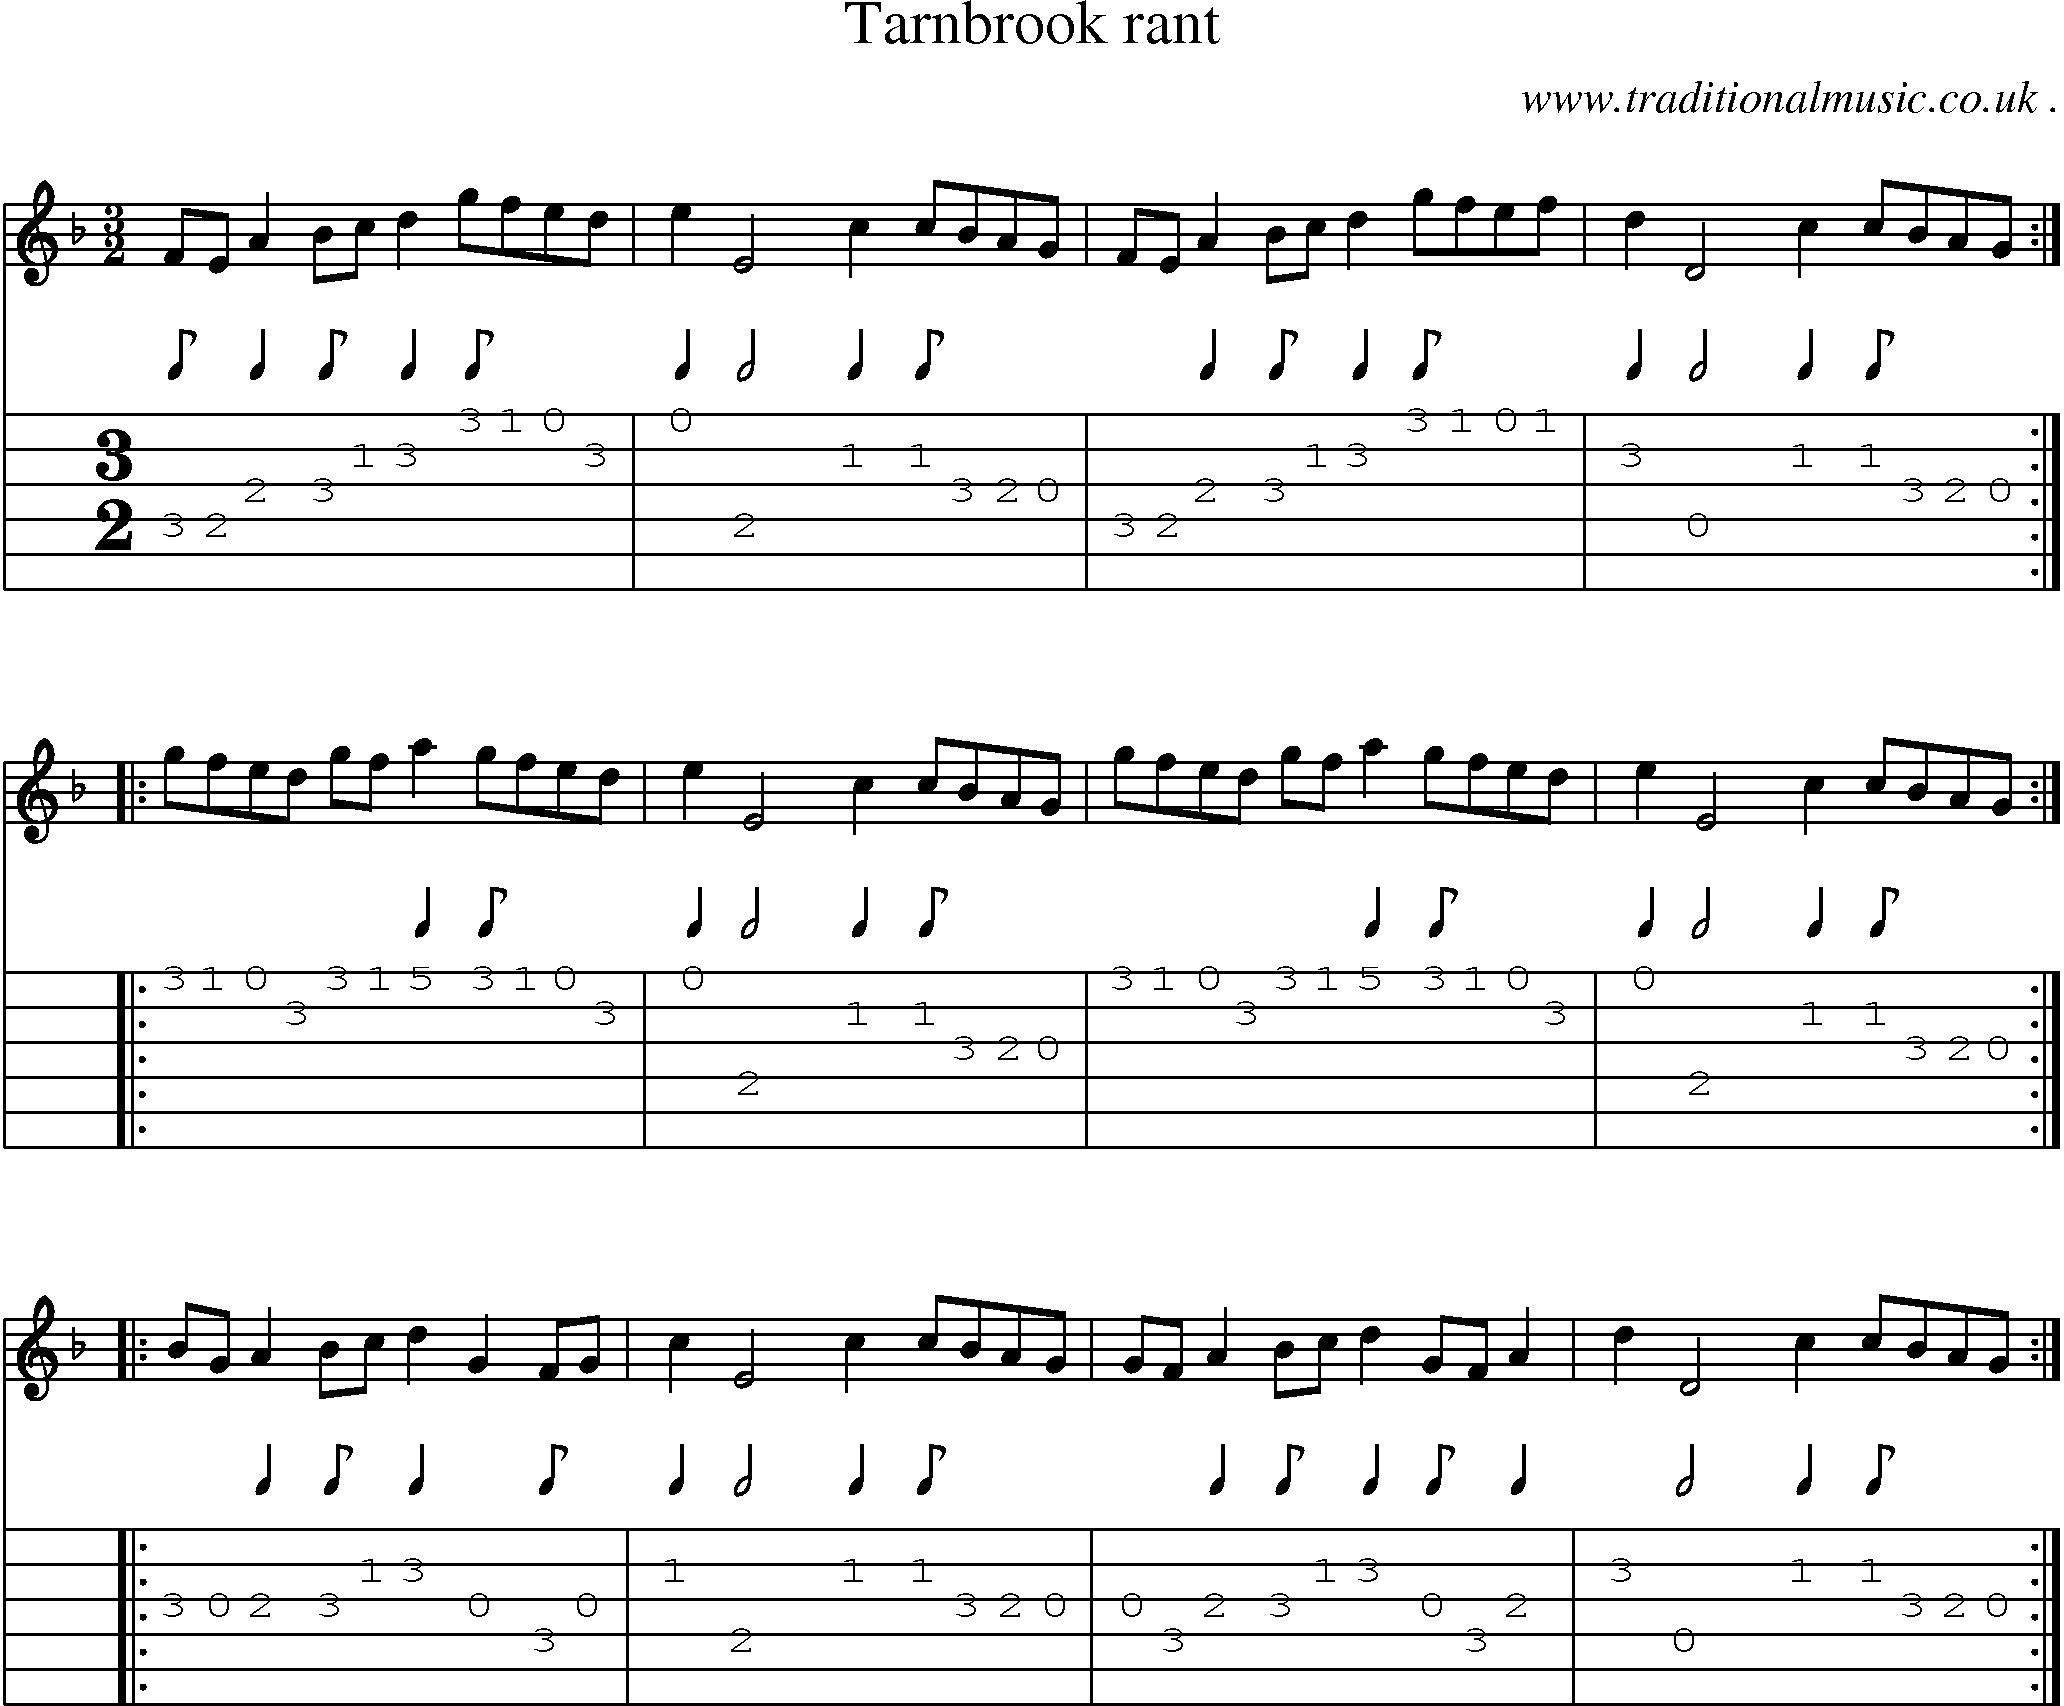 Sheet-Music and Guitar Tabs for Tarnbrook Rant